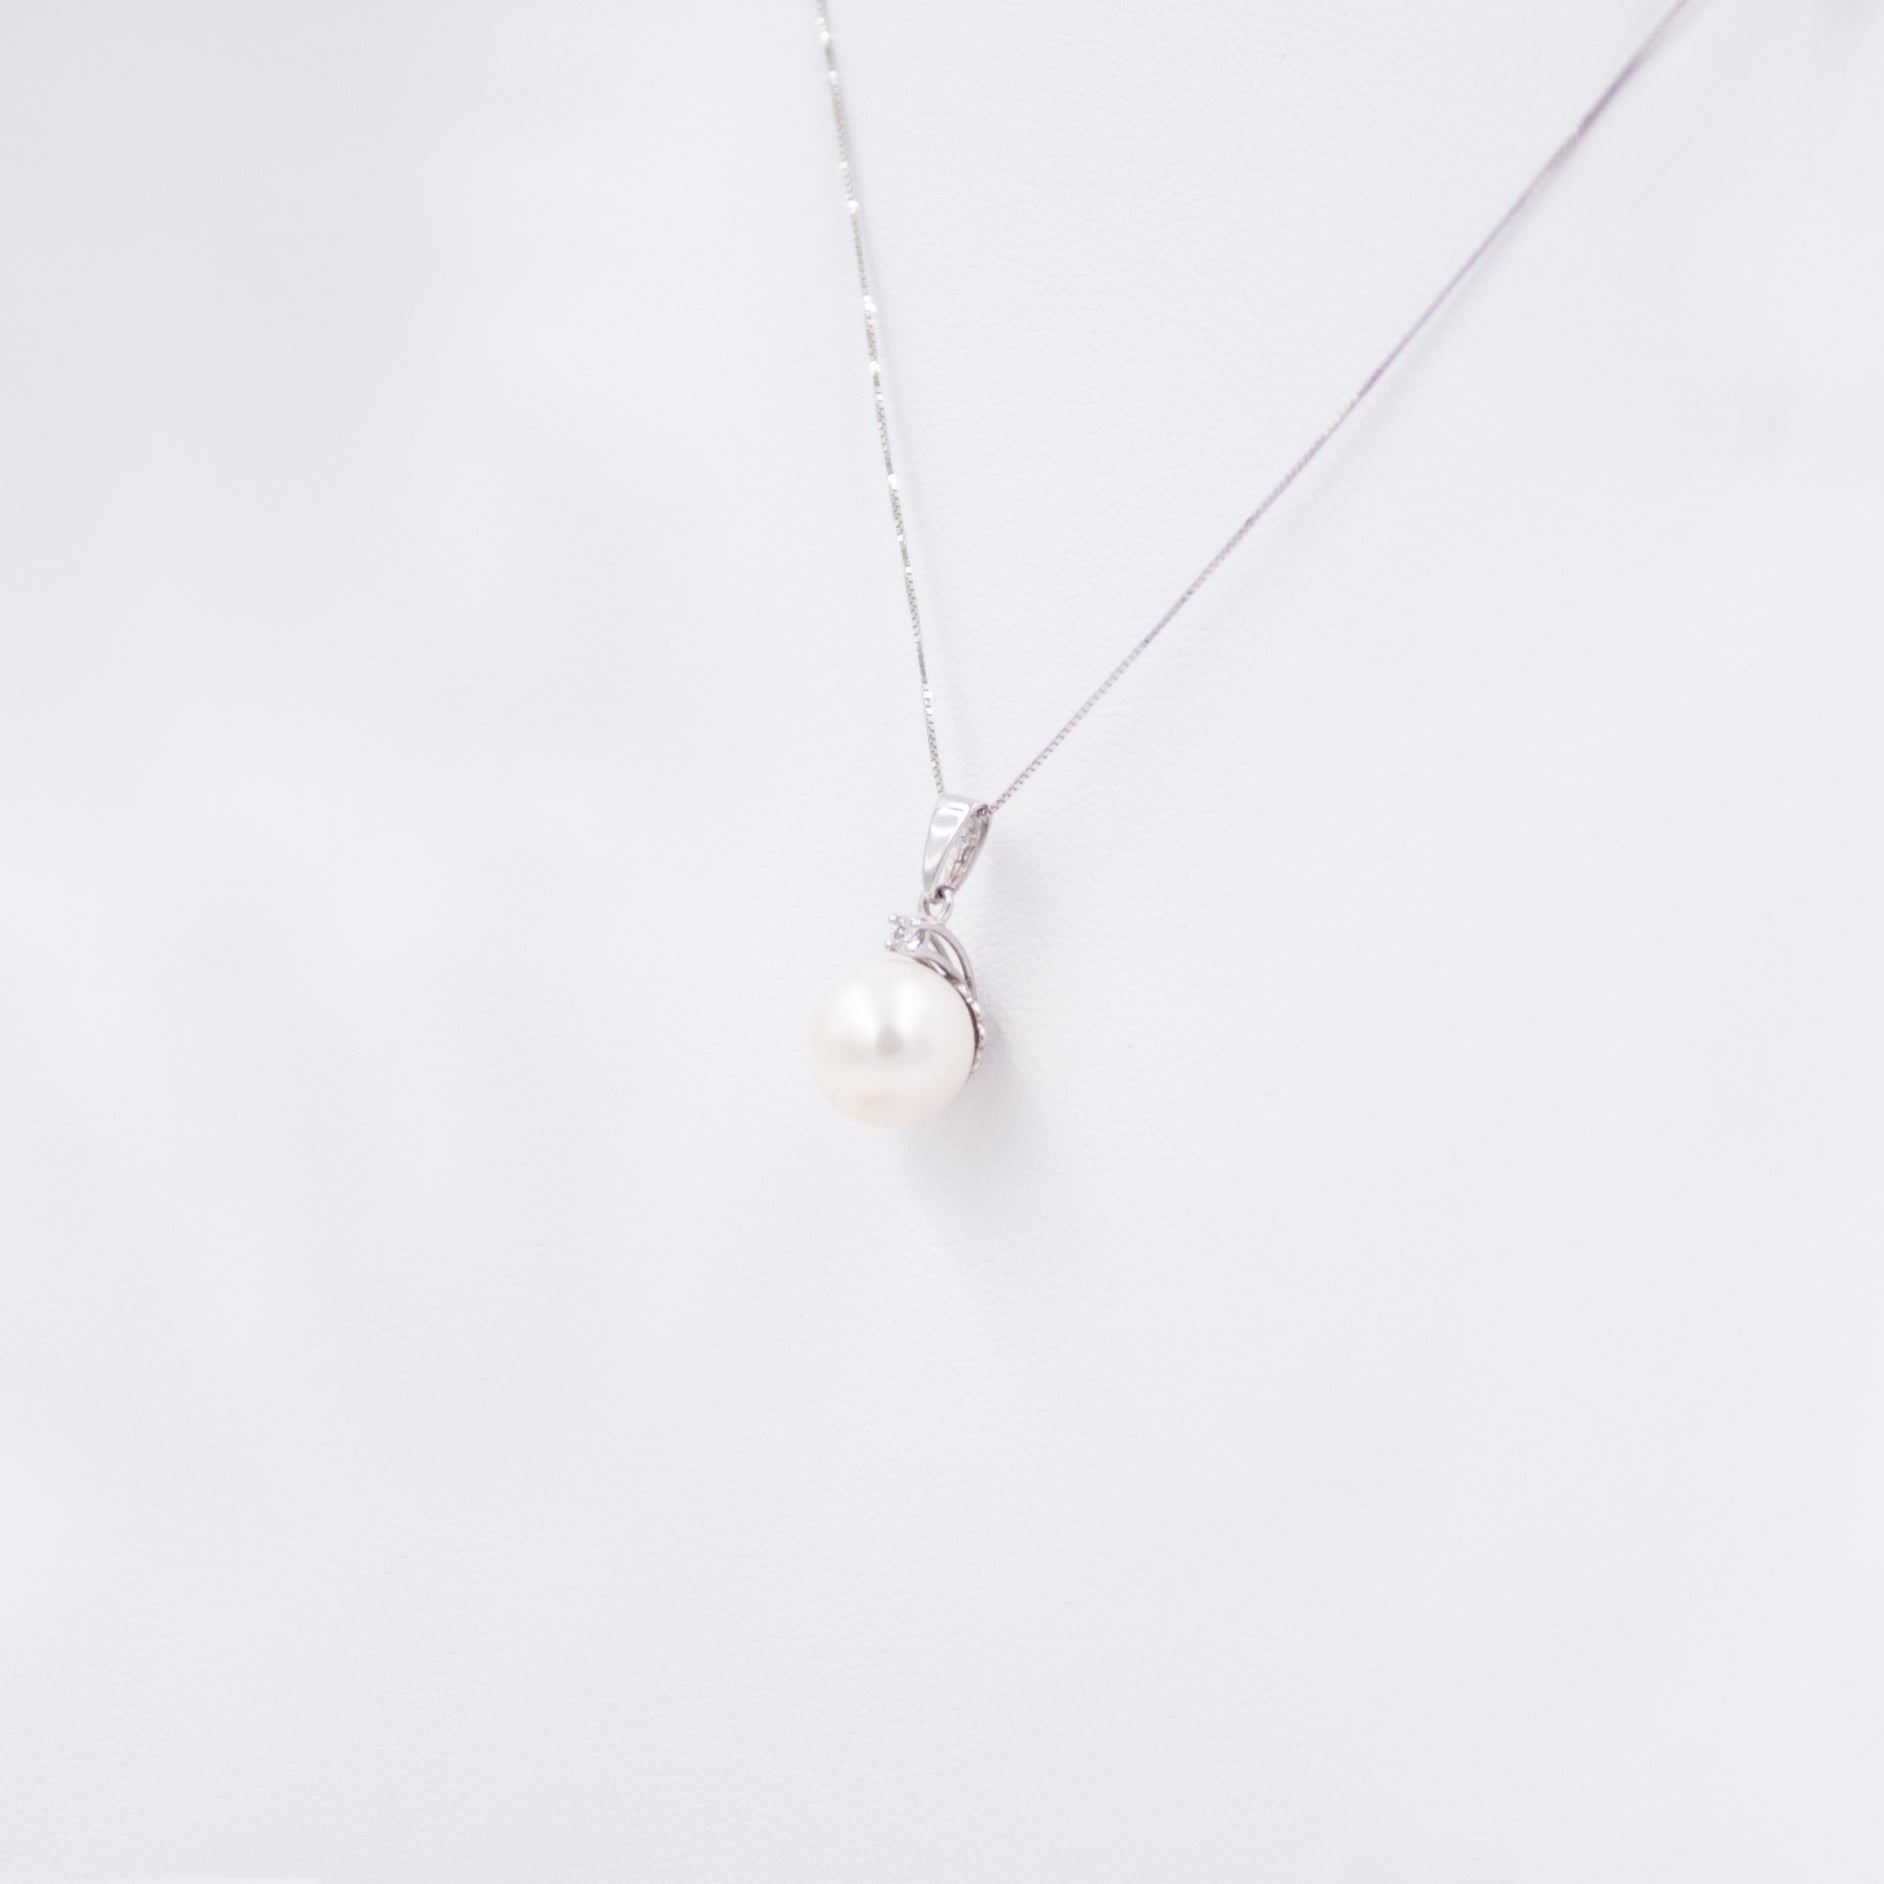 Necklace with central Pearl 7mm and Diamond